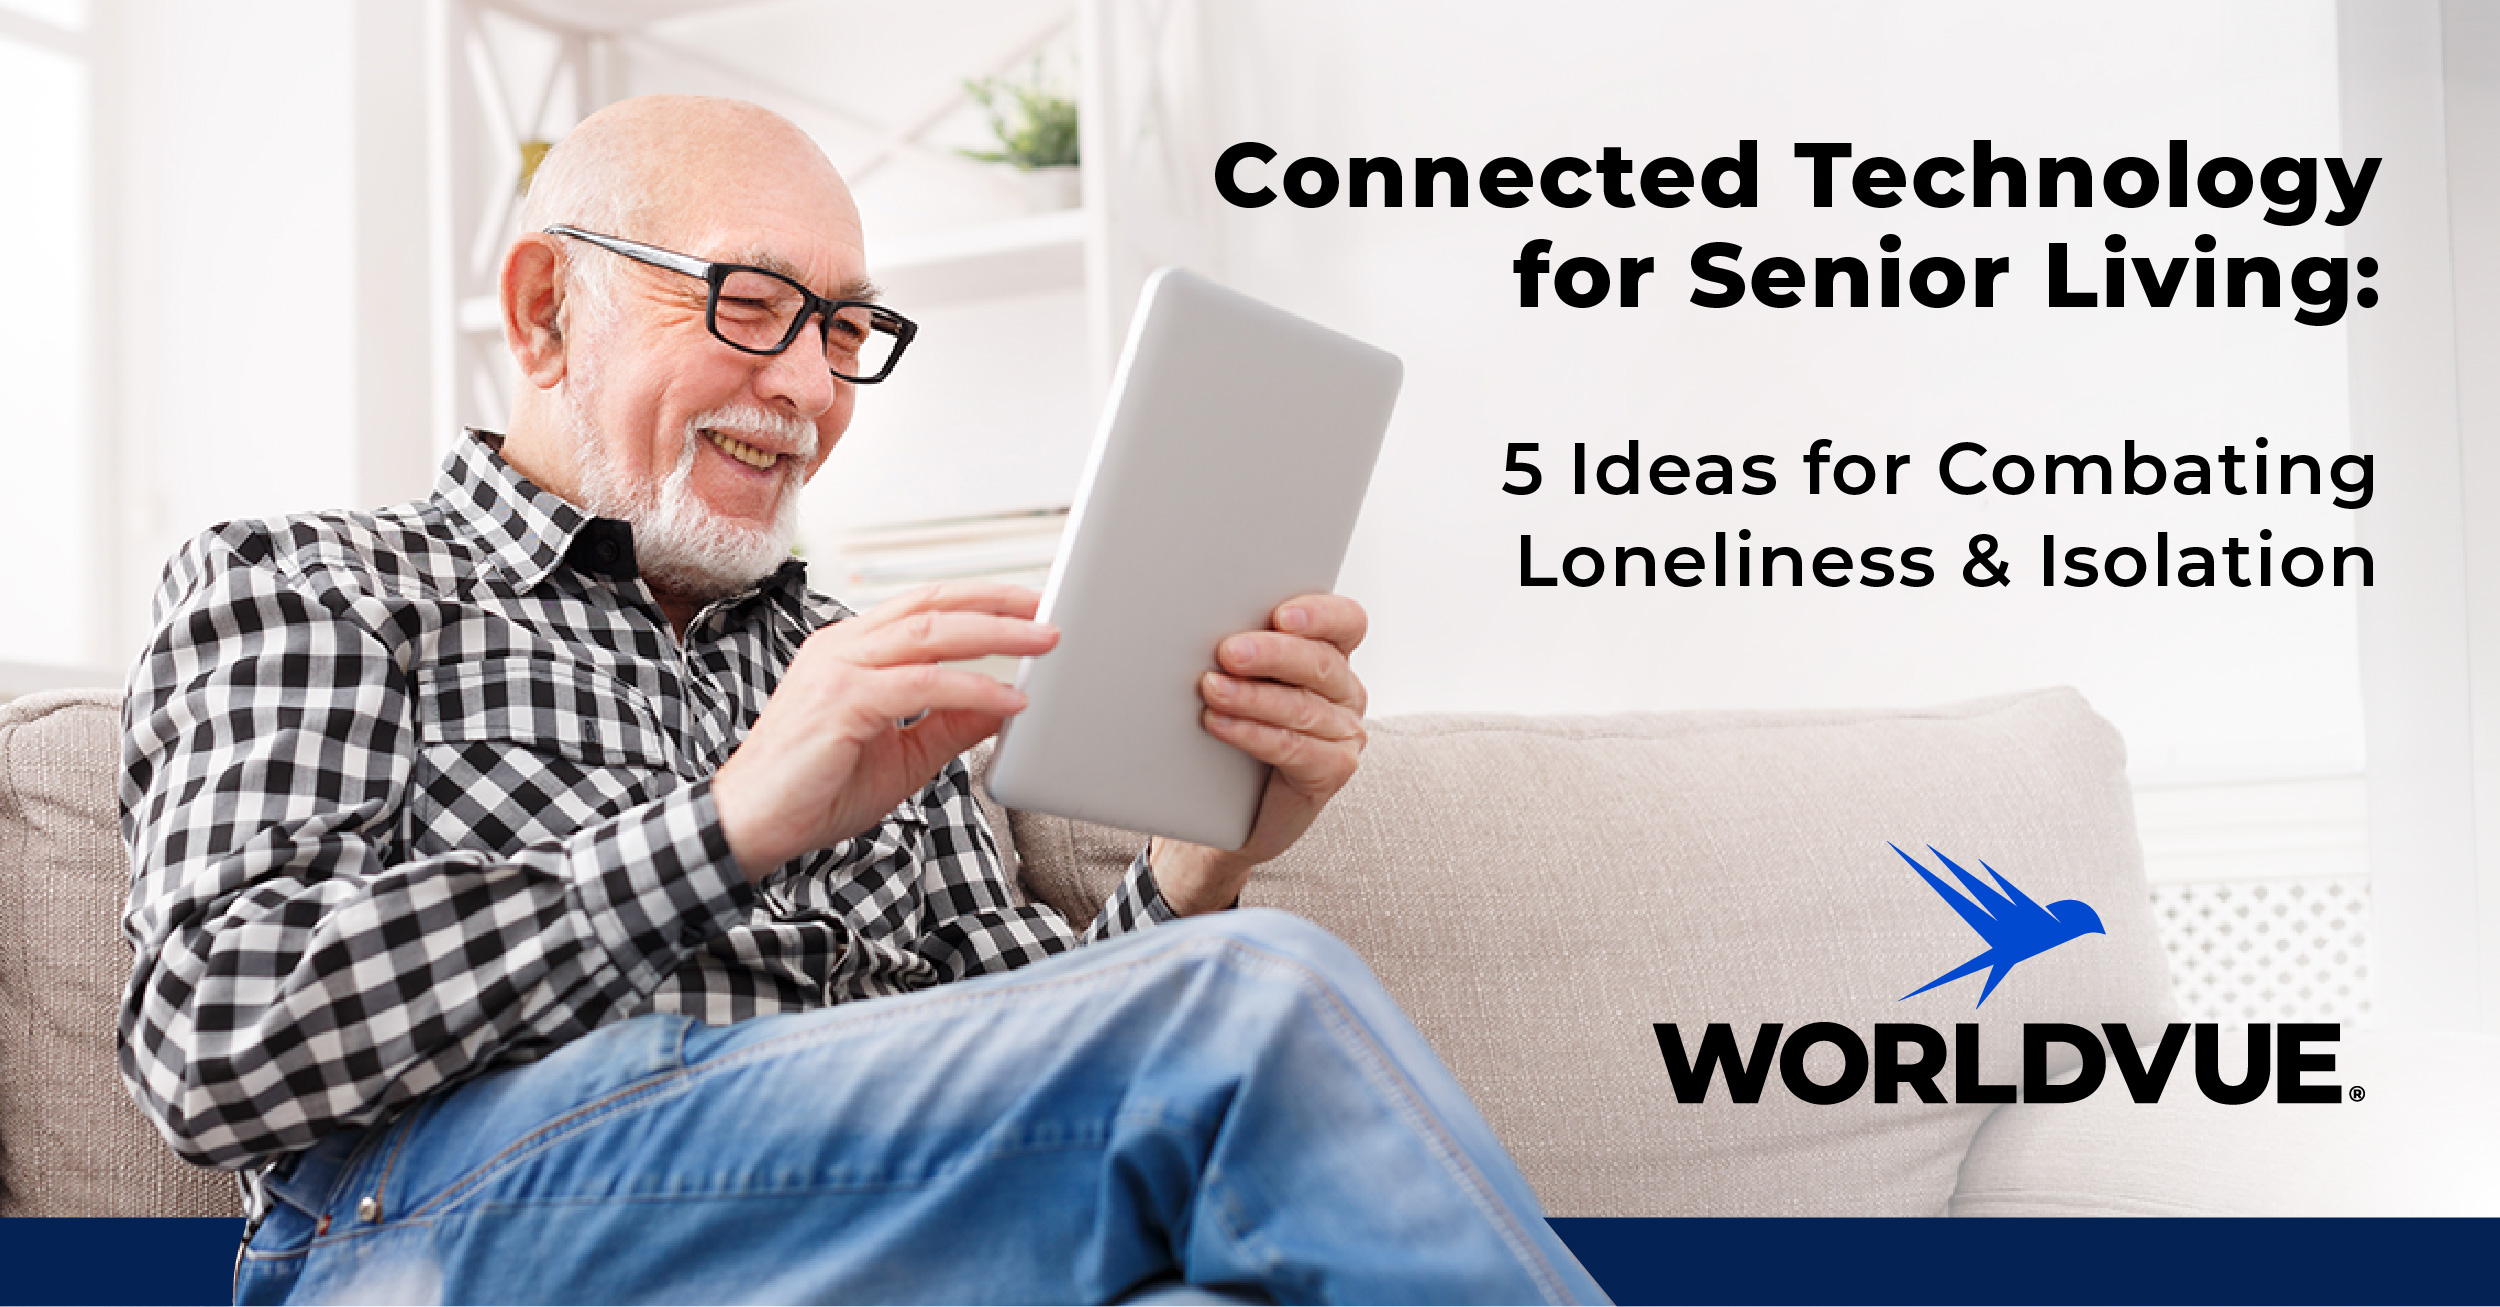 older man using tablet, with WorldVue logo and text that says "Connected Technology for Senior Living: 5 Ideas for Combating Loneliness and Isolation"